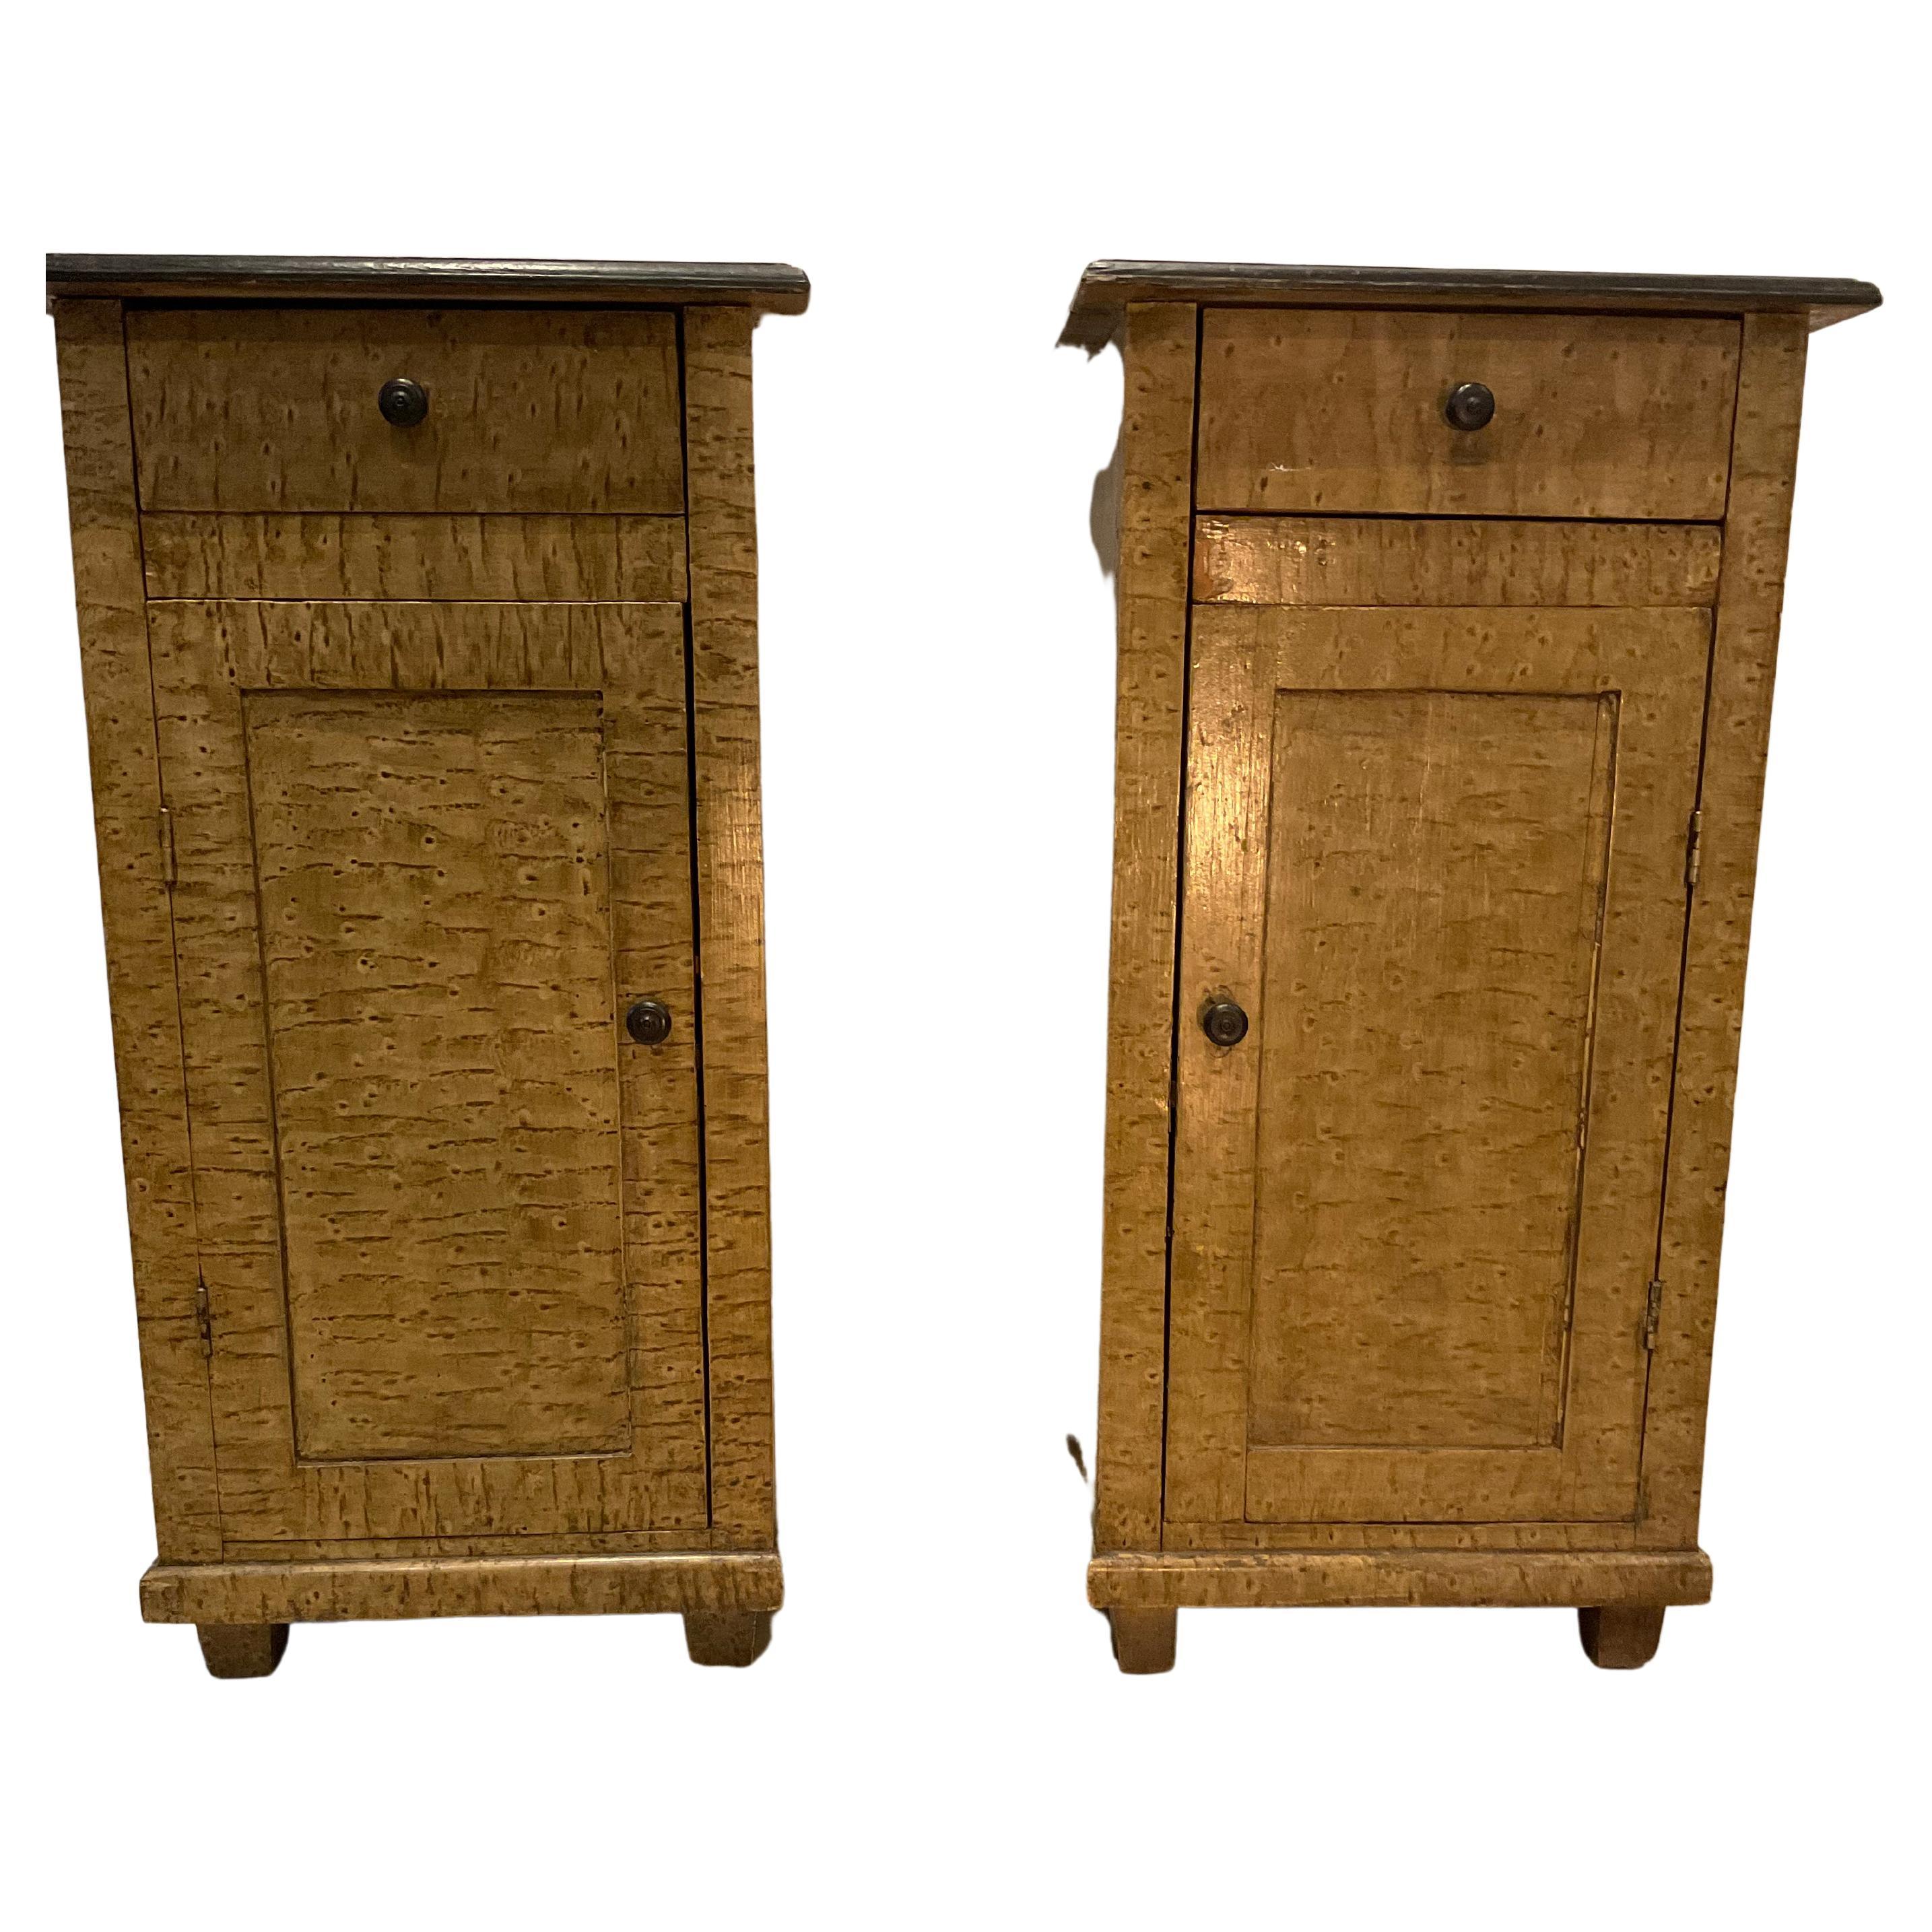 Pair of 19th Century Painted Bedside Cabinets with a Faux Maple Wood Effect